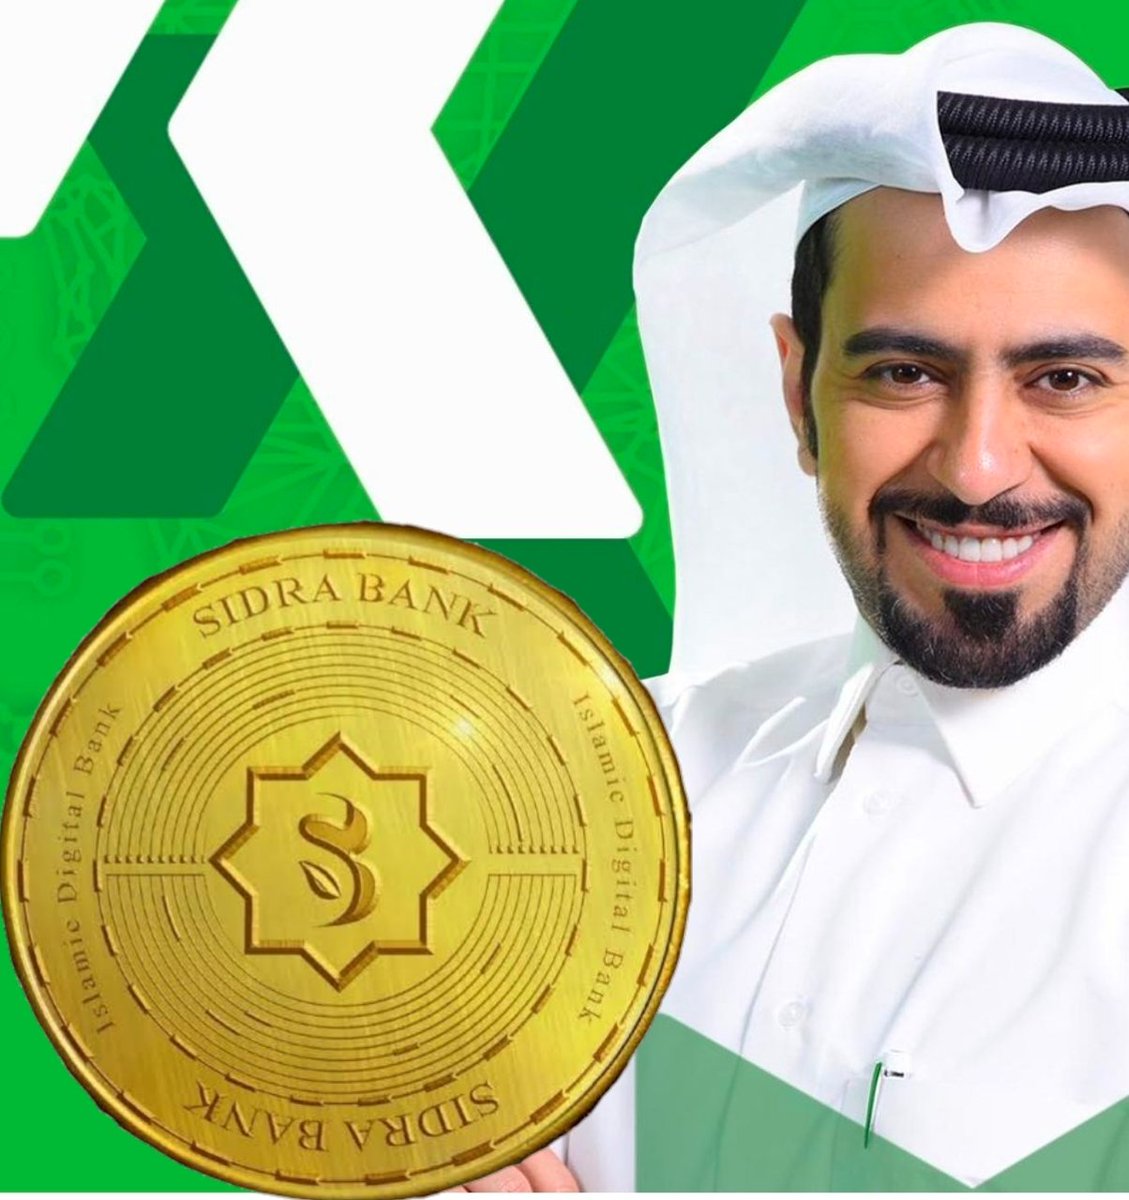 Sidra Mainnet Already Live, Just Submit Your Documents in KYC Port & Wait For Verification ! Do You Believe in SidraBank Project? YES or NO Athene Network Mine Free Gem Coins App Link👇👇 play.google.com/store/apps/det… Refer Code - fd1f4ba380 #SidraFamily #iceNetwork #Airdrop #BTC